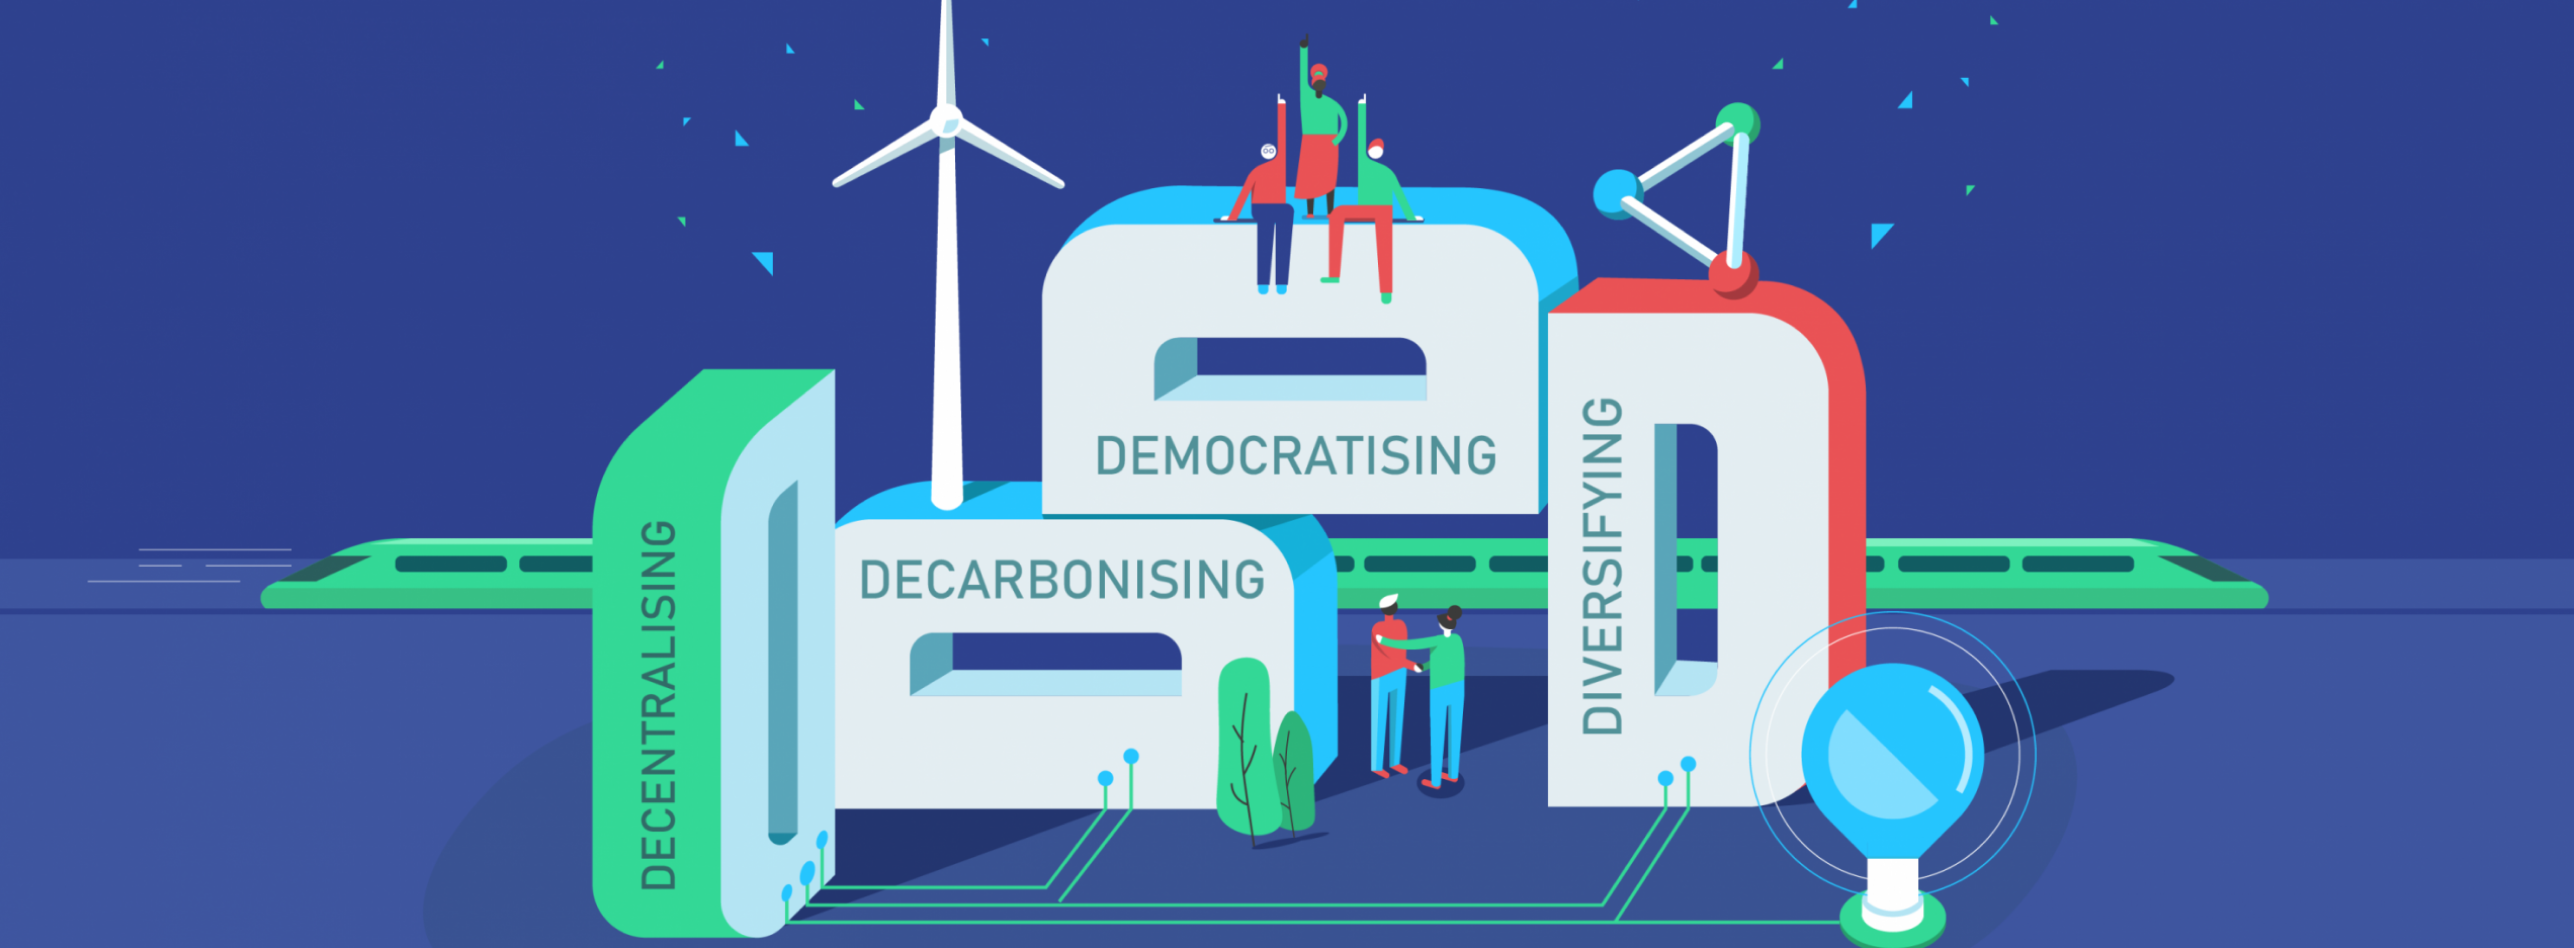 Diagram showcasing Friends Provident Foundation's 4D Economy model, highlighting key elements of democratization, decarbonization, decentralization, and diversification aimed at fostering a just and sustainable economic system.